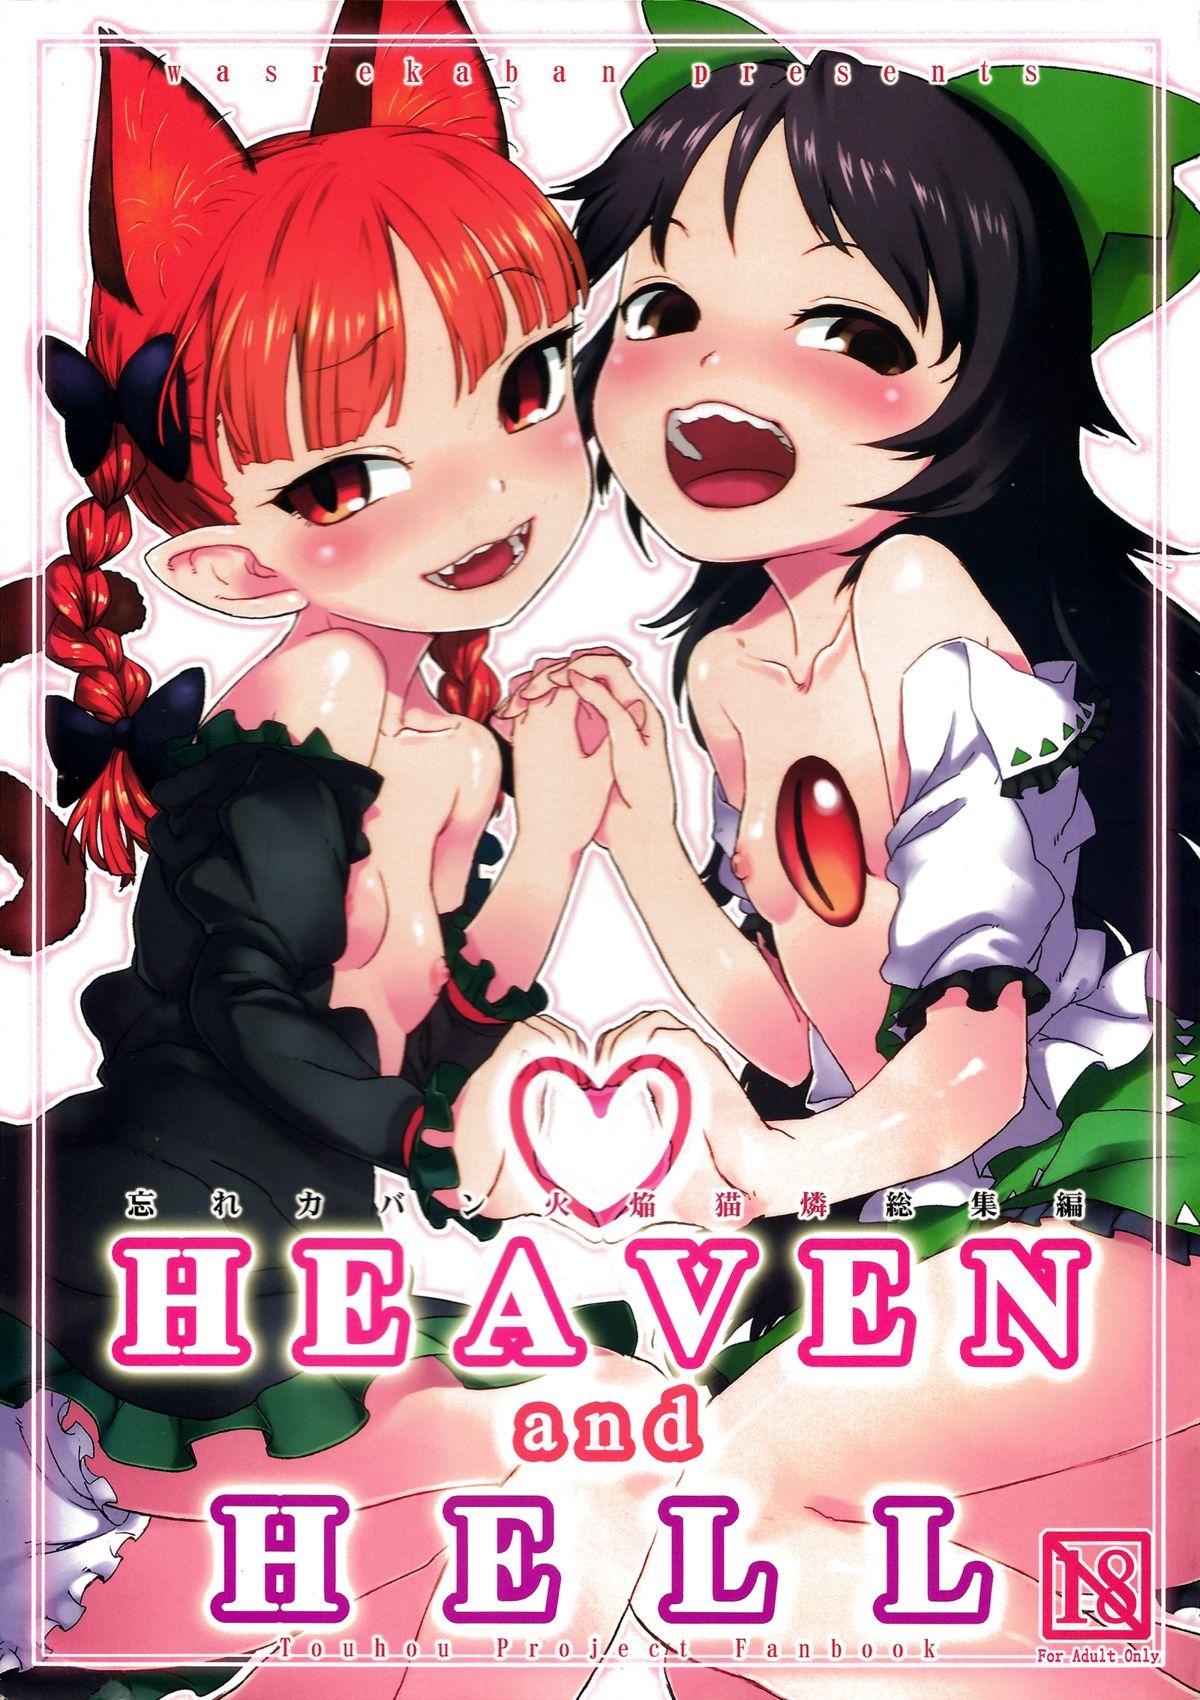 Mofos HEAVEN and HELL - Touhou project Party - Picture 1